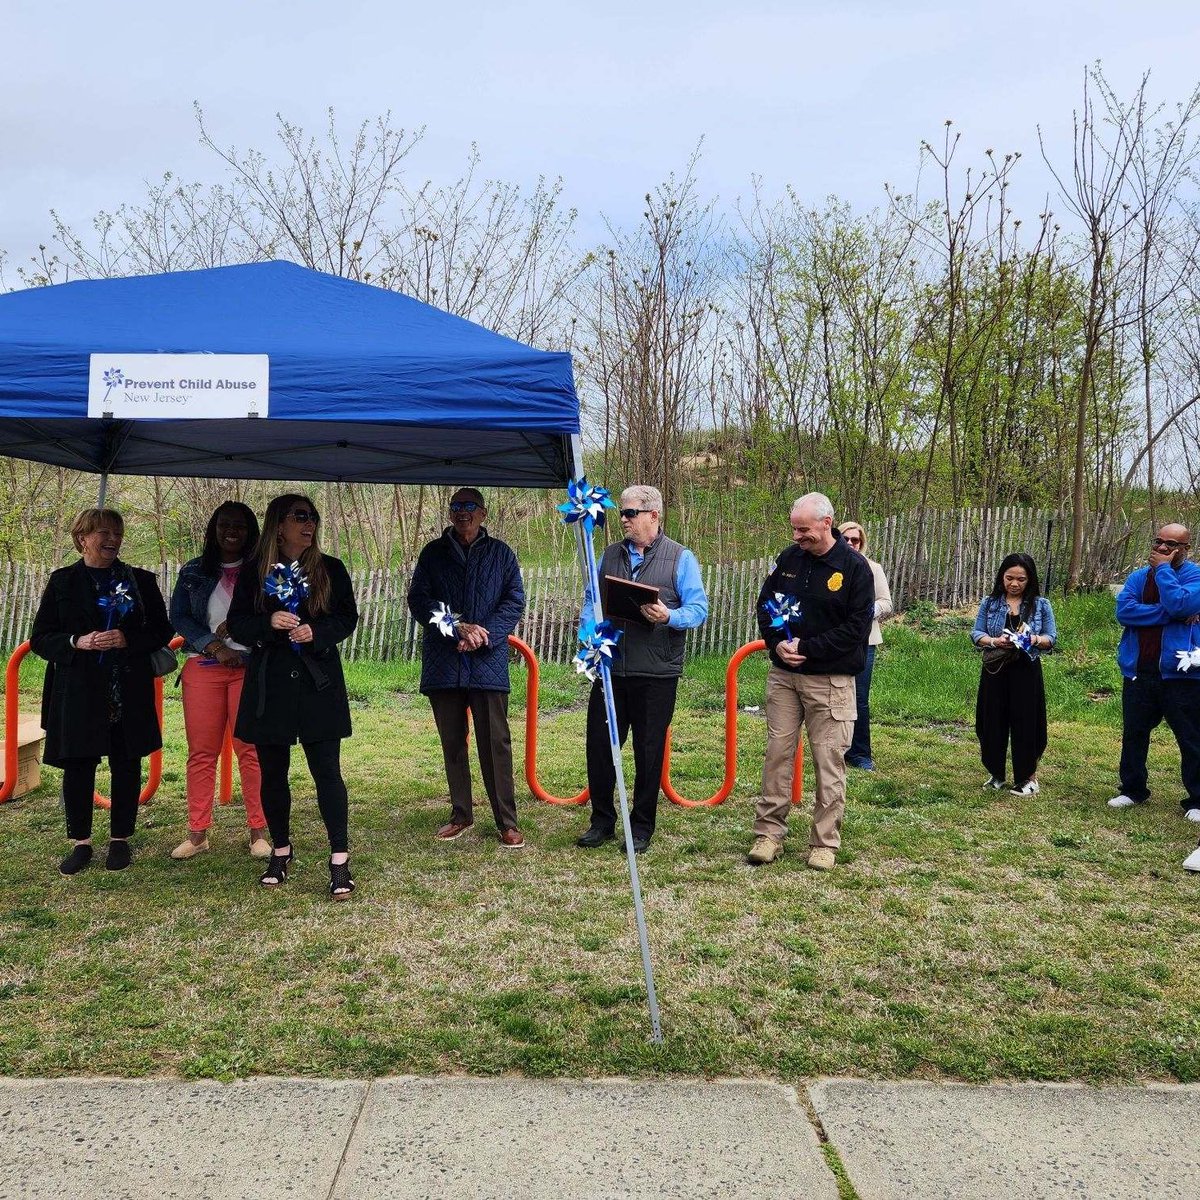 Over the weekend, we joined Prevent Child Abuse NJ in Middletown to plant pinwheels, a meaningful symbol in our ongoing efforts against child abuse. Together, we're cultivating a future where every child can thrive.

#CFHI #VNAHG #PreventChildAbuse